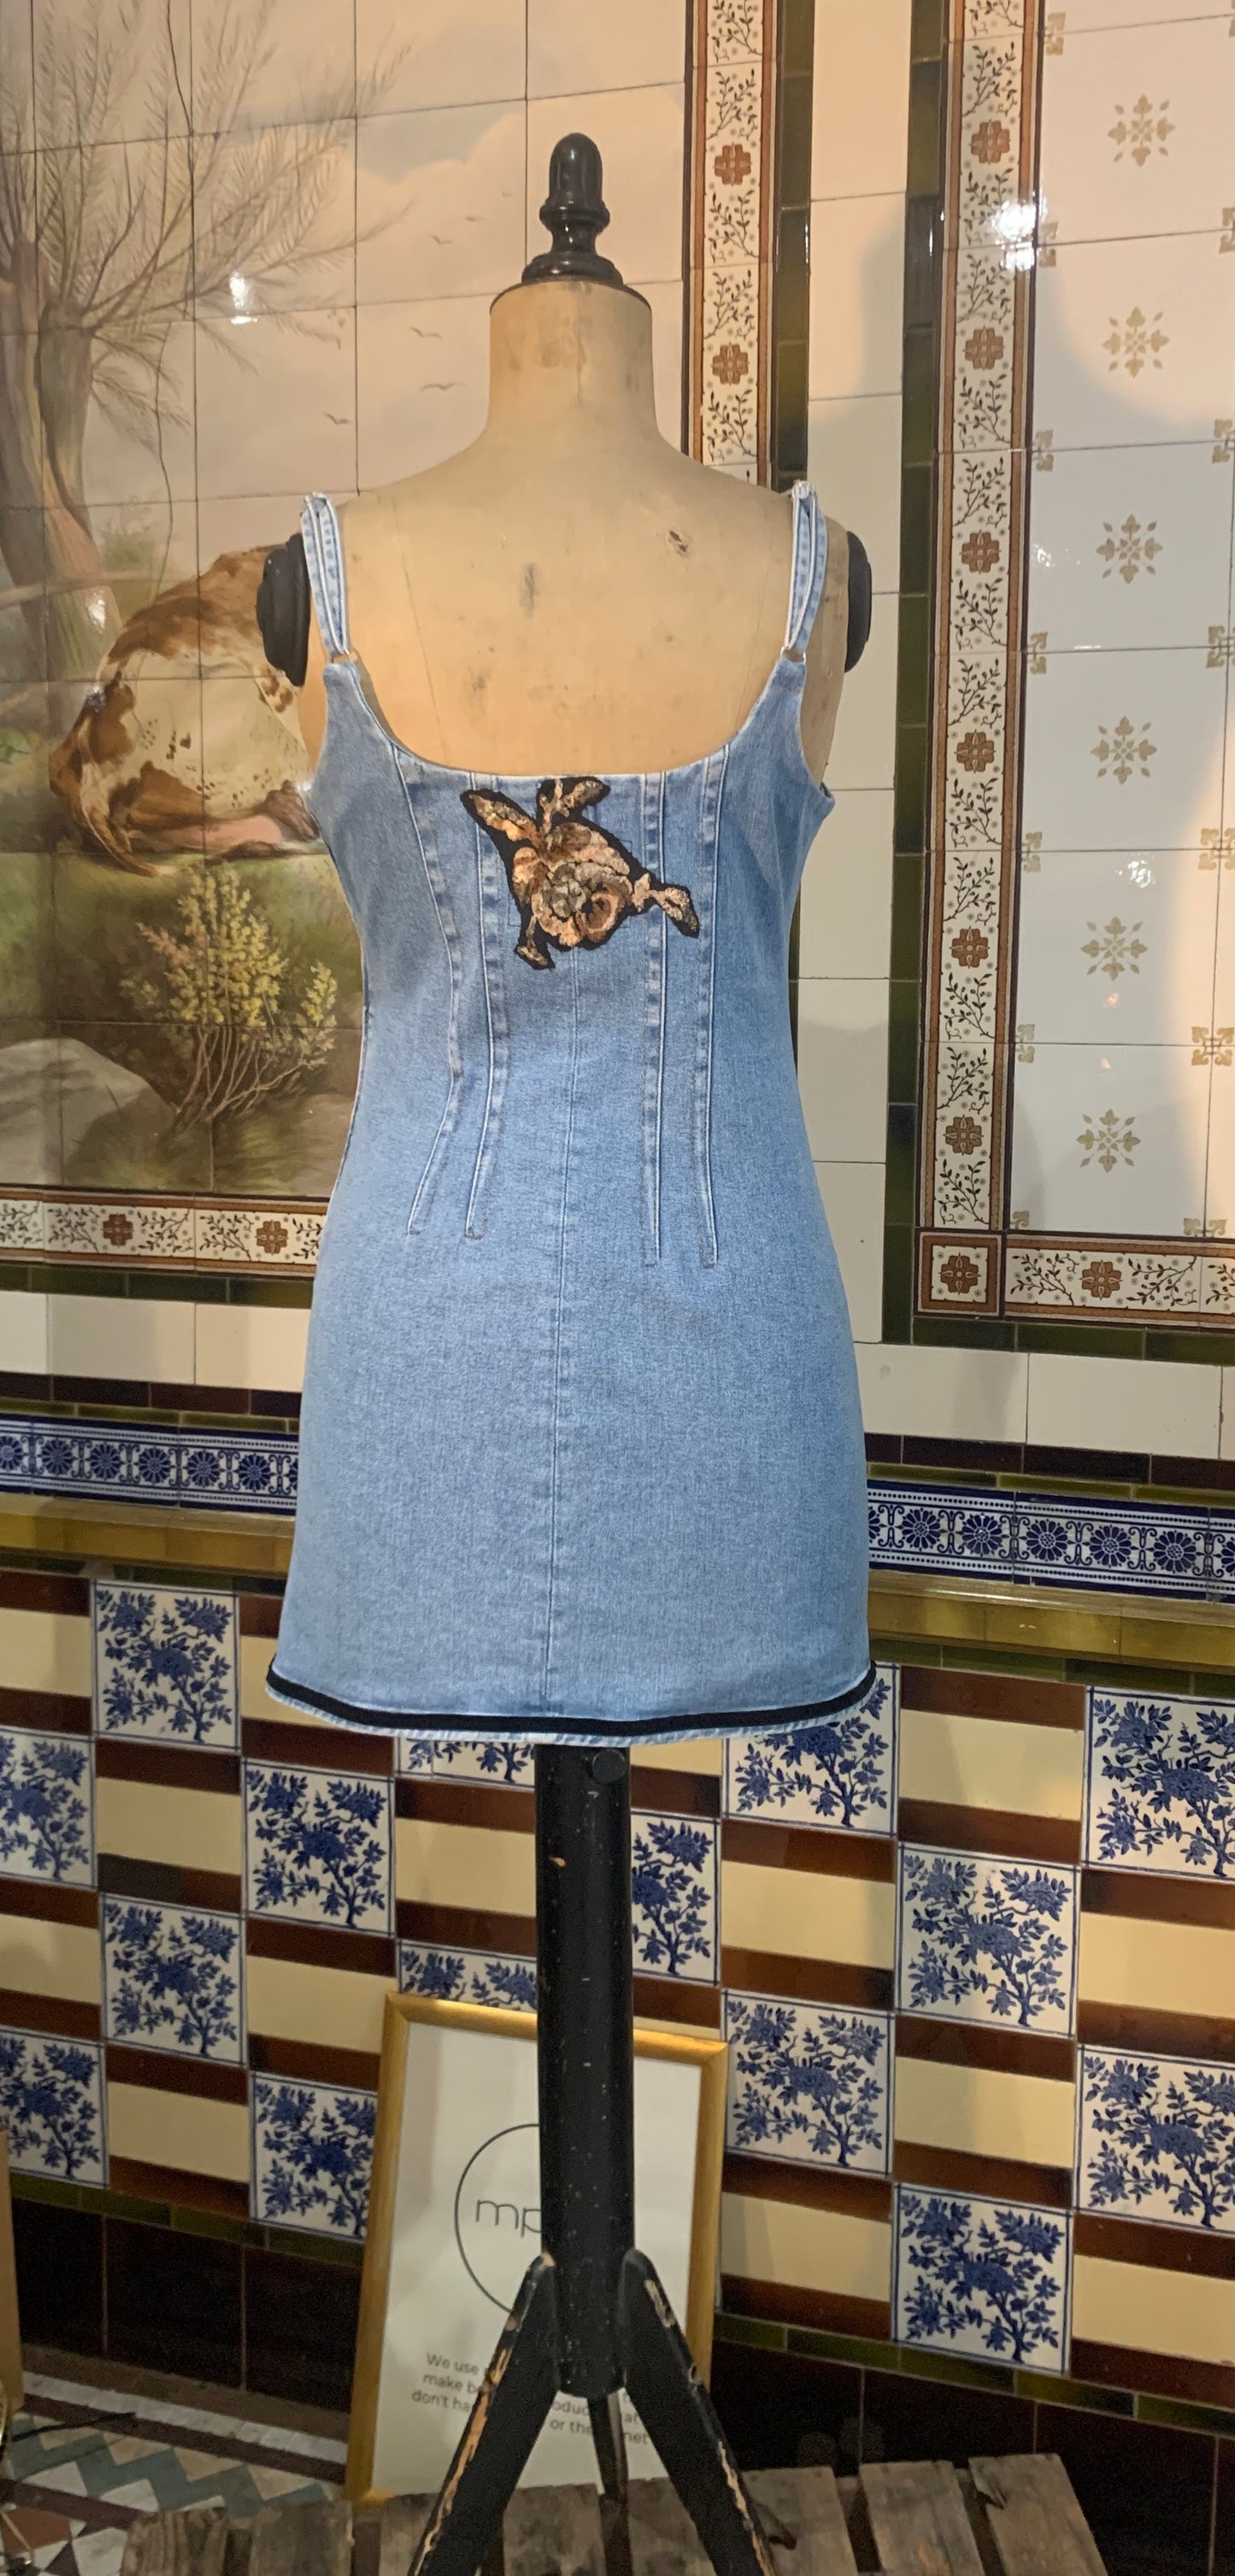 An Upcycled Dress from mpira.